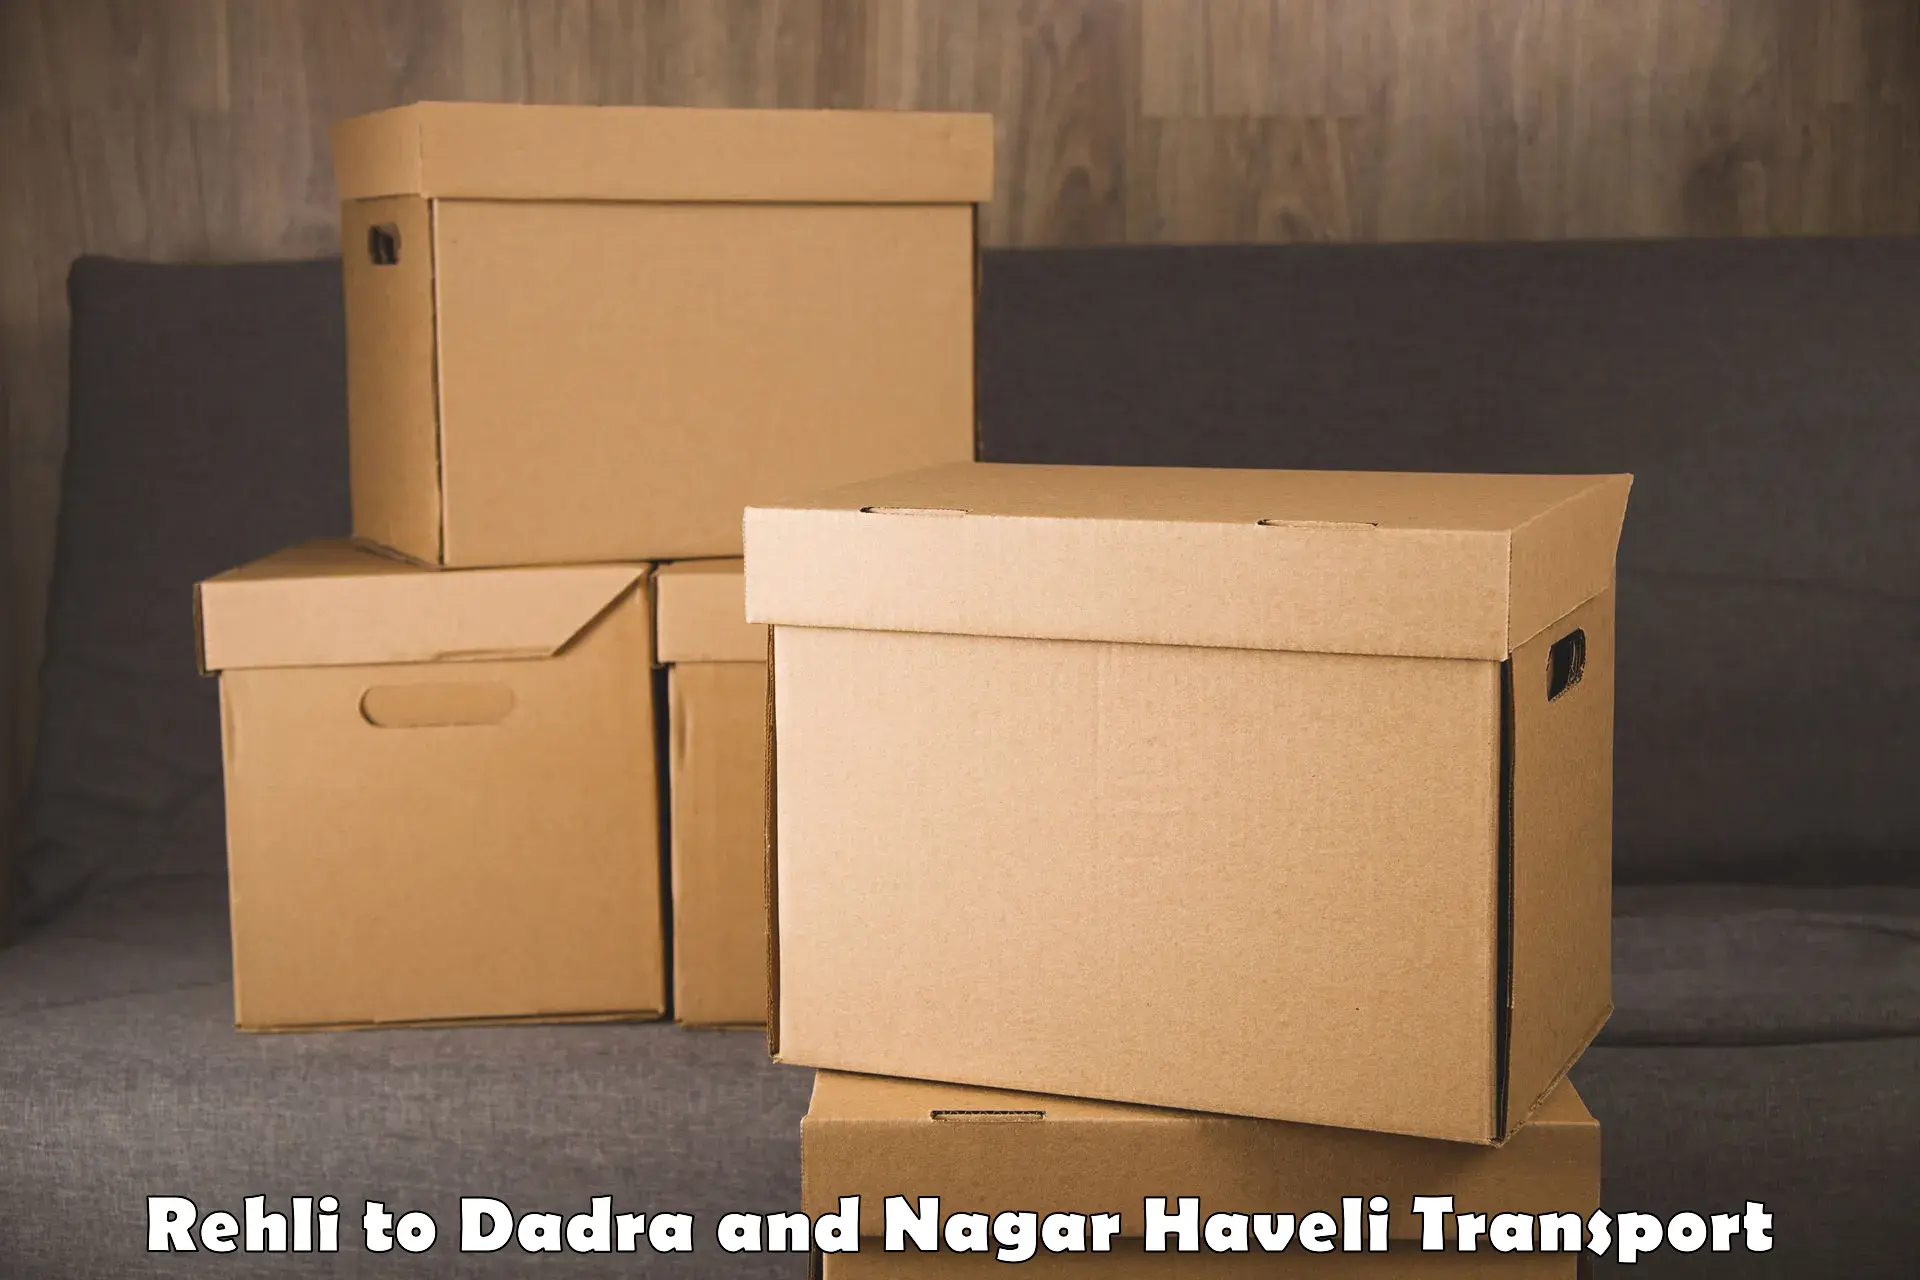 Container transportation services Rehli to Dadra and Nagar Haveli